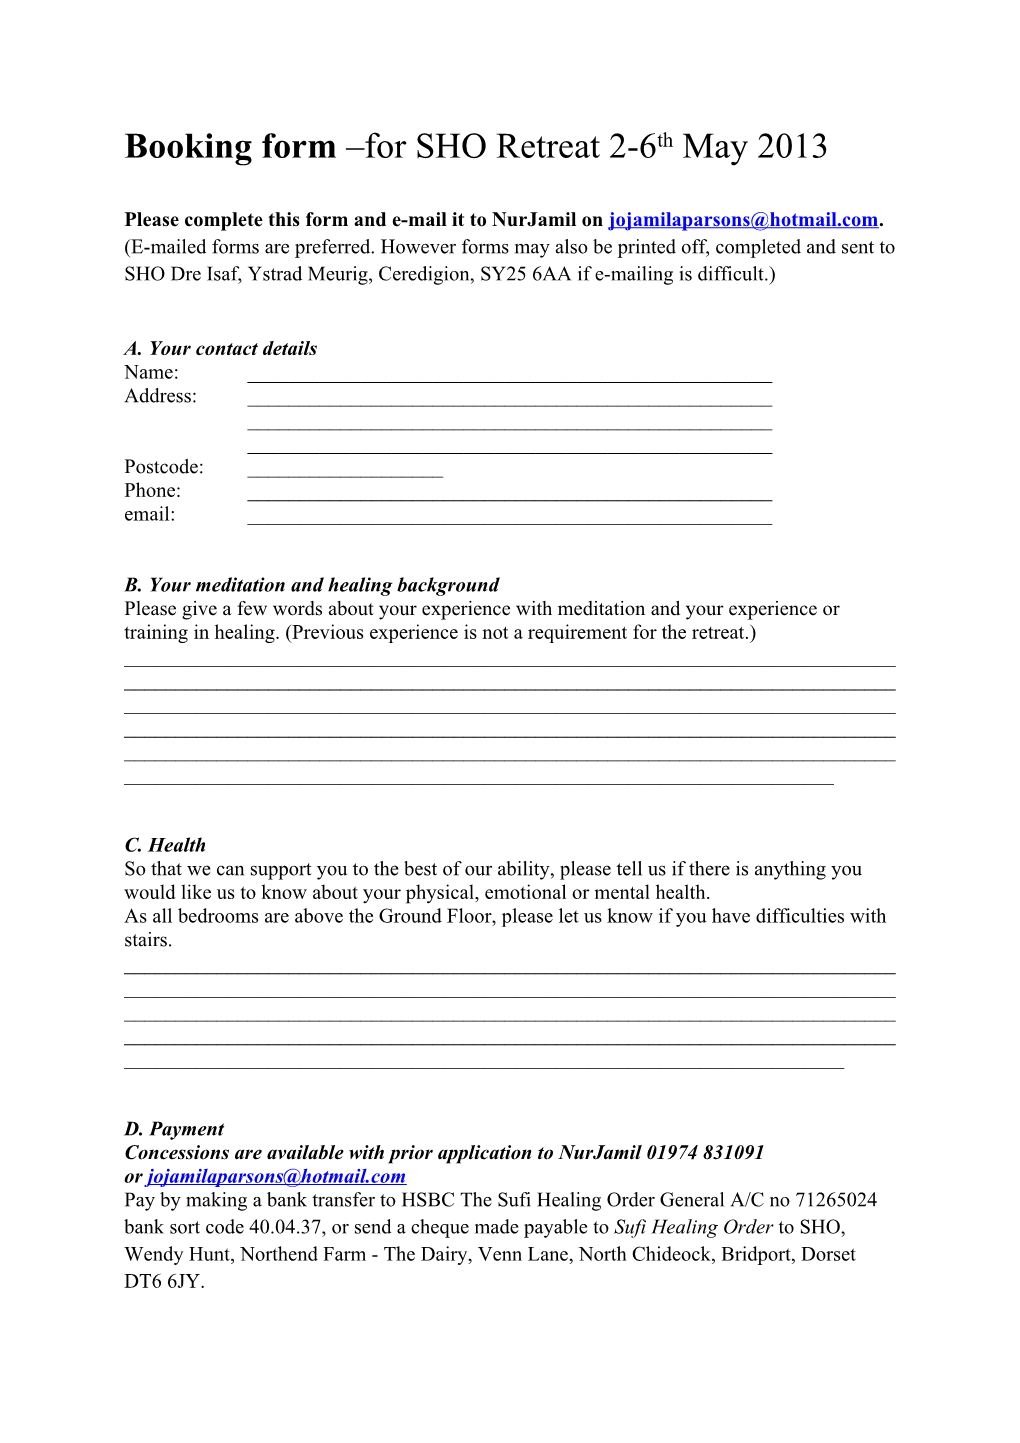 Please Complete This Form and E-Mail It to Nurjamil on